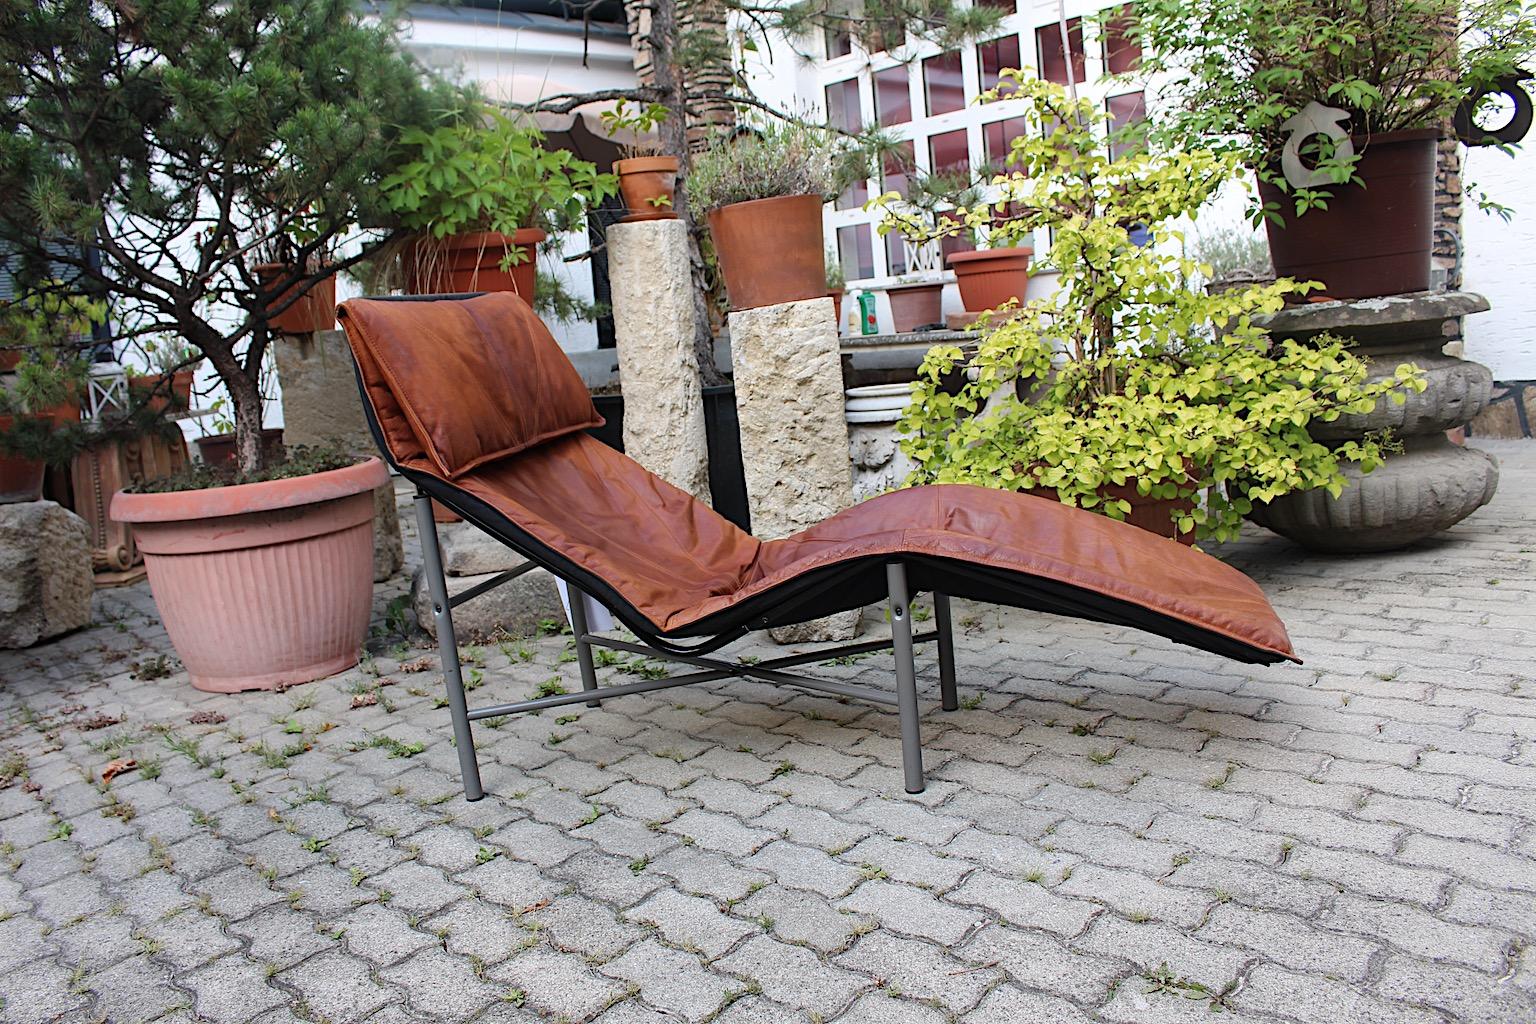 Modern freestanding vintage chaise longue or daybed from brown stitched leather and metal by Tord Bjorklund, 1970s Sweden.
A stylish and very comfortable chaise longue or daybed from metal with a loose cushion from thick stitched leather in cognac